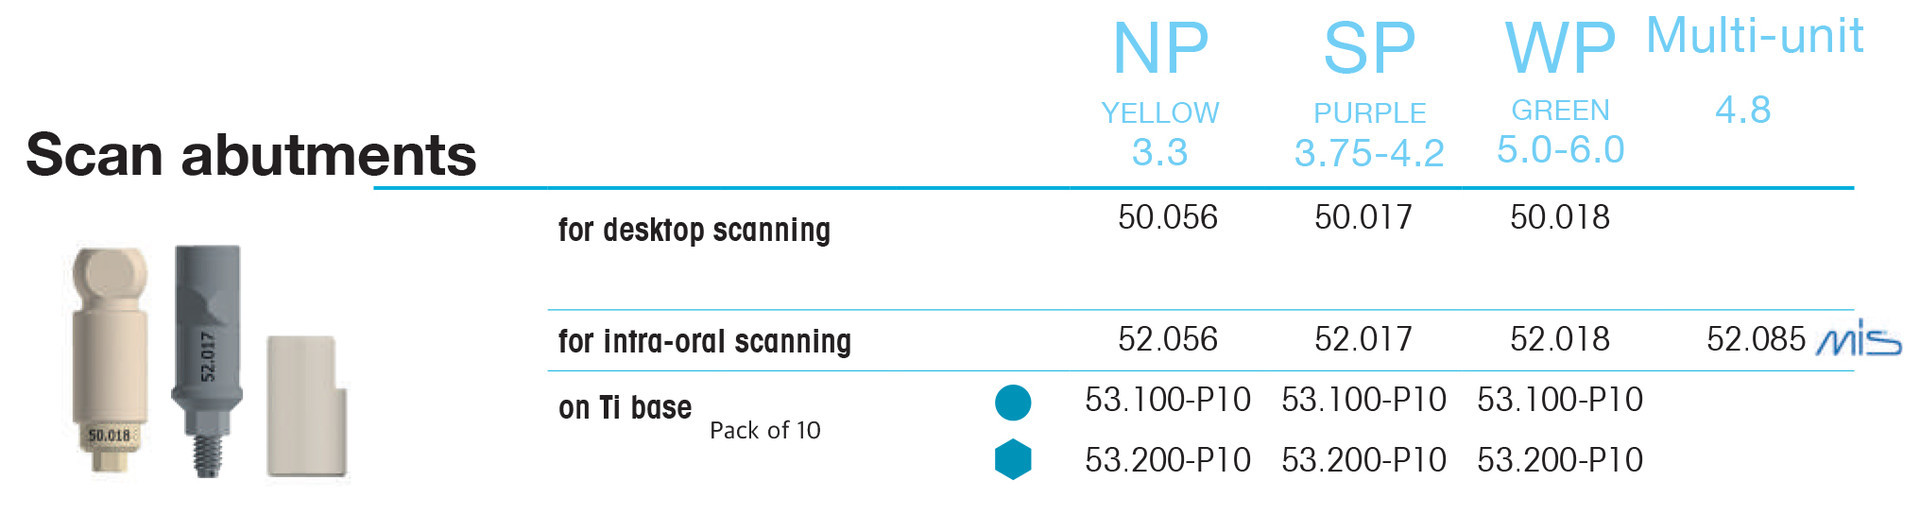 Scan abutment for intra-oral scanning NP 3.3, yellow